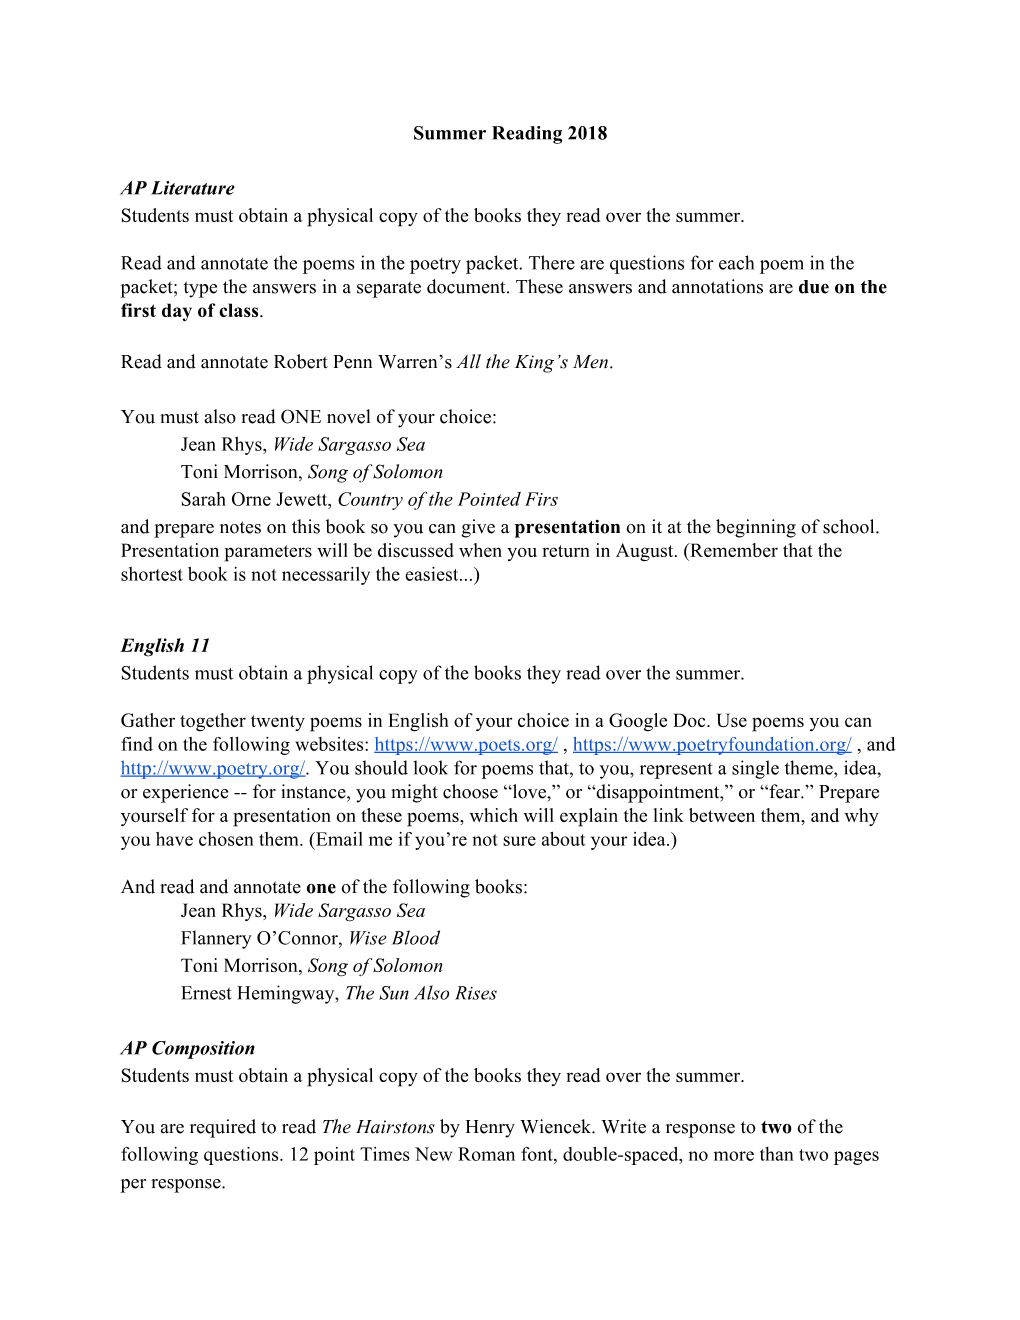 Summer Reading 2018 AP Literature Students Must Obtain a Physical Copy of the Books They Read Over the Summer. Read and Annotate